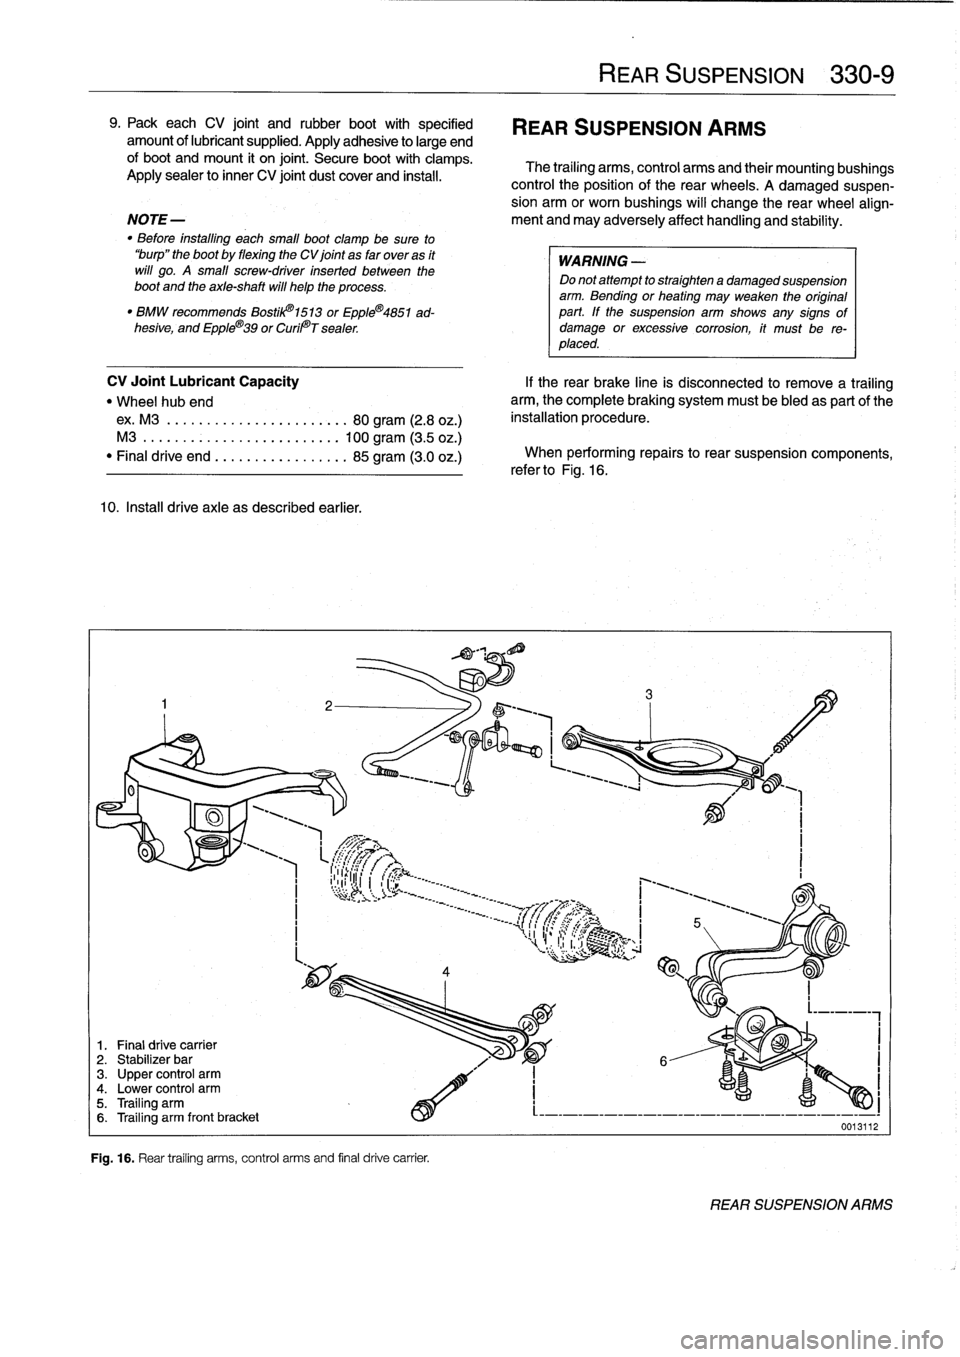 BMW 318i 1997 E36 Owners Manual 9
.
Packeach
CV
joint
and
rubber
boot
with
specified

	

REAR
SUSPENSION
ARMS
amount
of
lubricant
supplied
.
Apply
adhesive
to
large
end
of
boot
and
mount
it
on
joint
.
Secure
boot
with
clamps
.

	

T